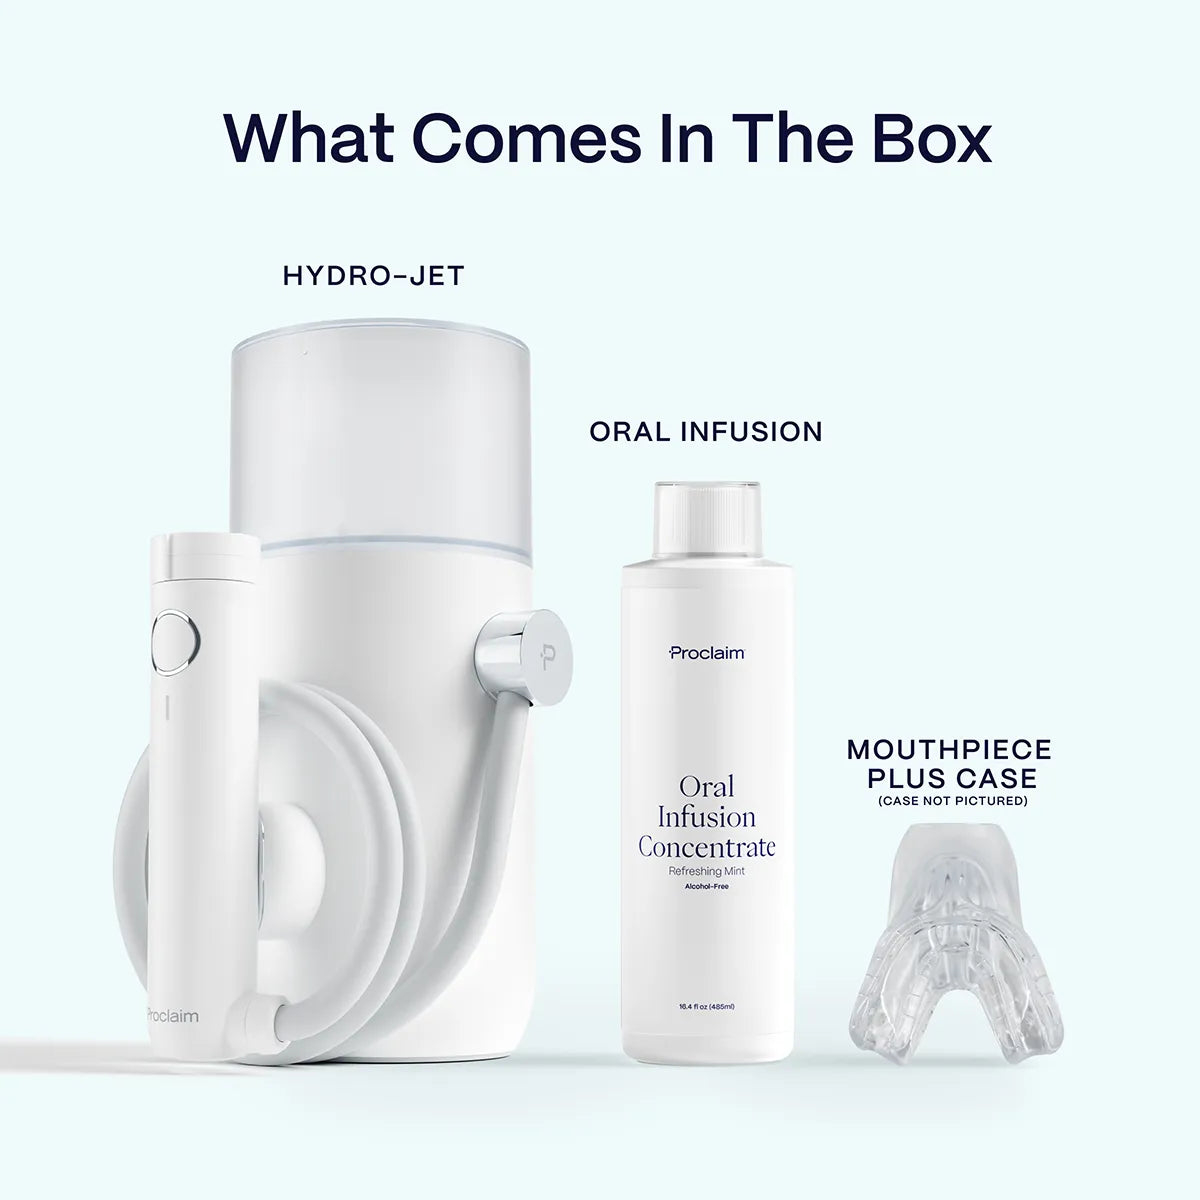 What comes in the box for your bundle. A hydro-jet base station, a mouthpiece and 1 bottle of oral infusion